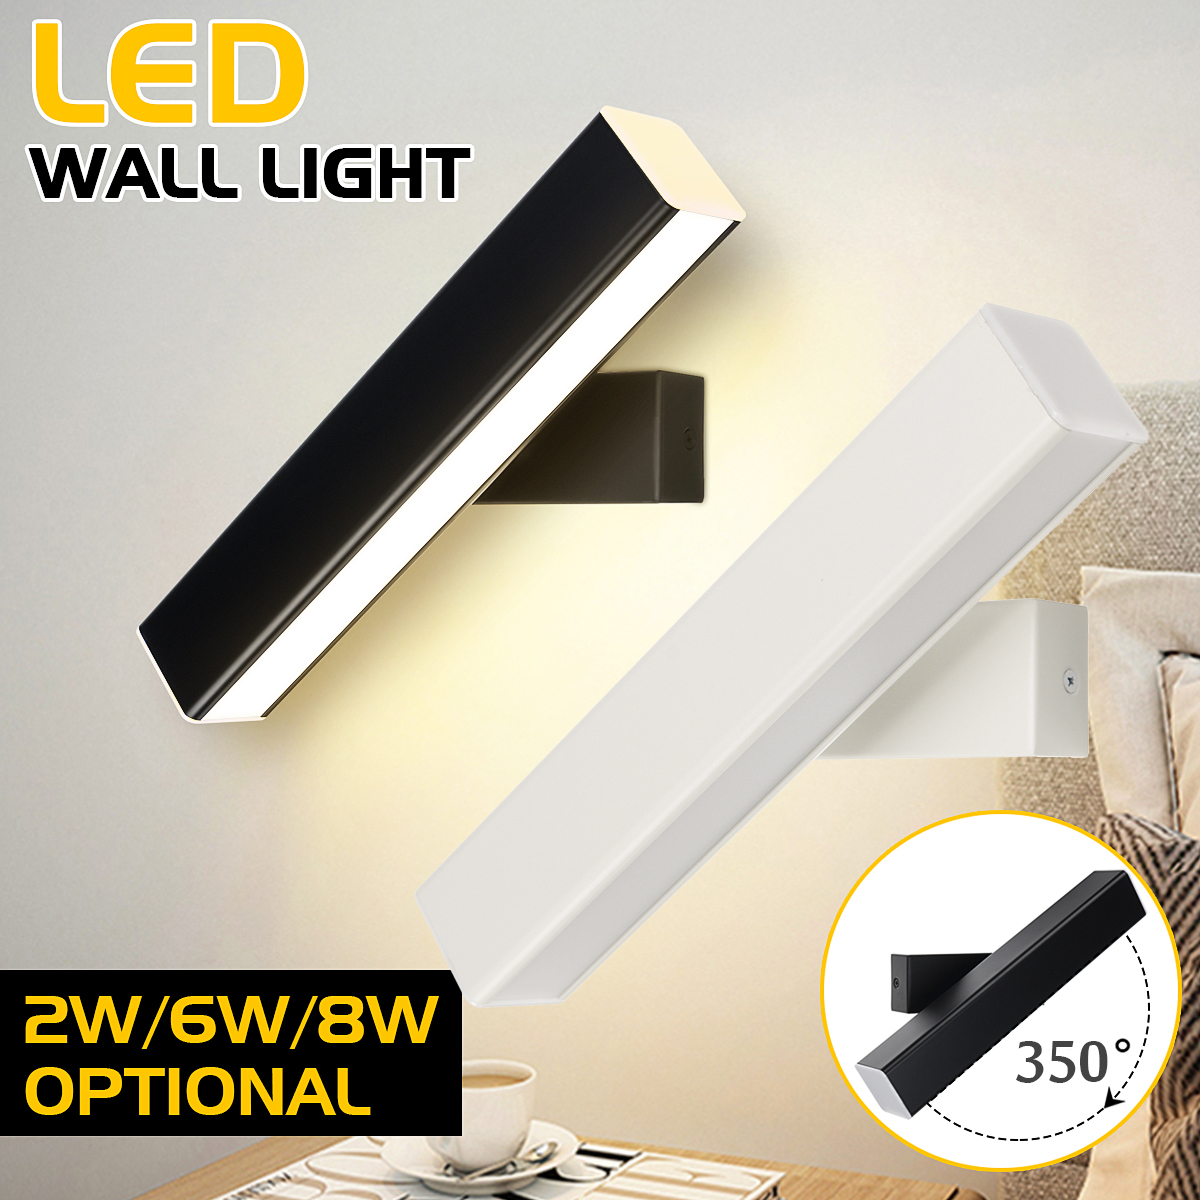 Modern-LED-Wall-Light-Stair-Room-Hotel-Hall-Porch-Decor-Lamp-Fixture-Warm-White-1676243-1